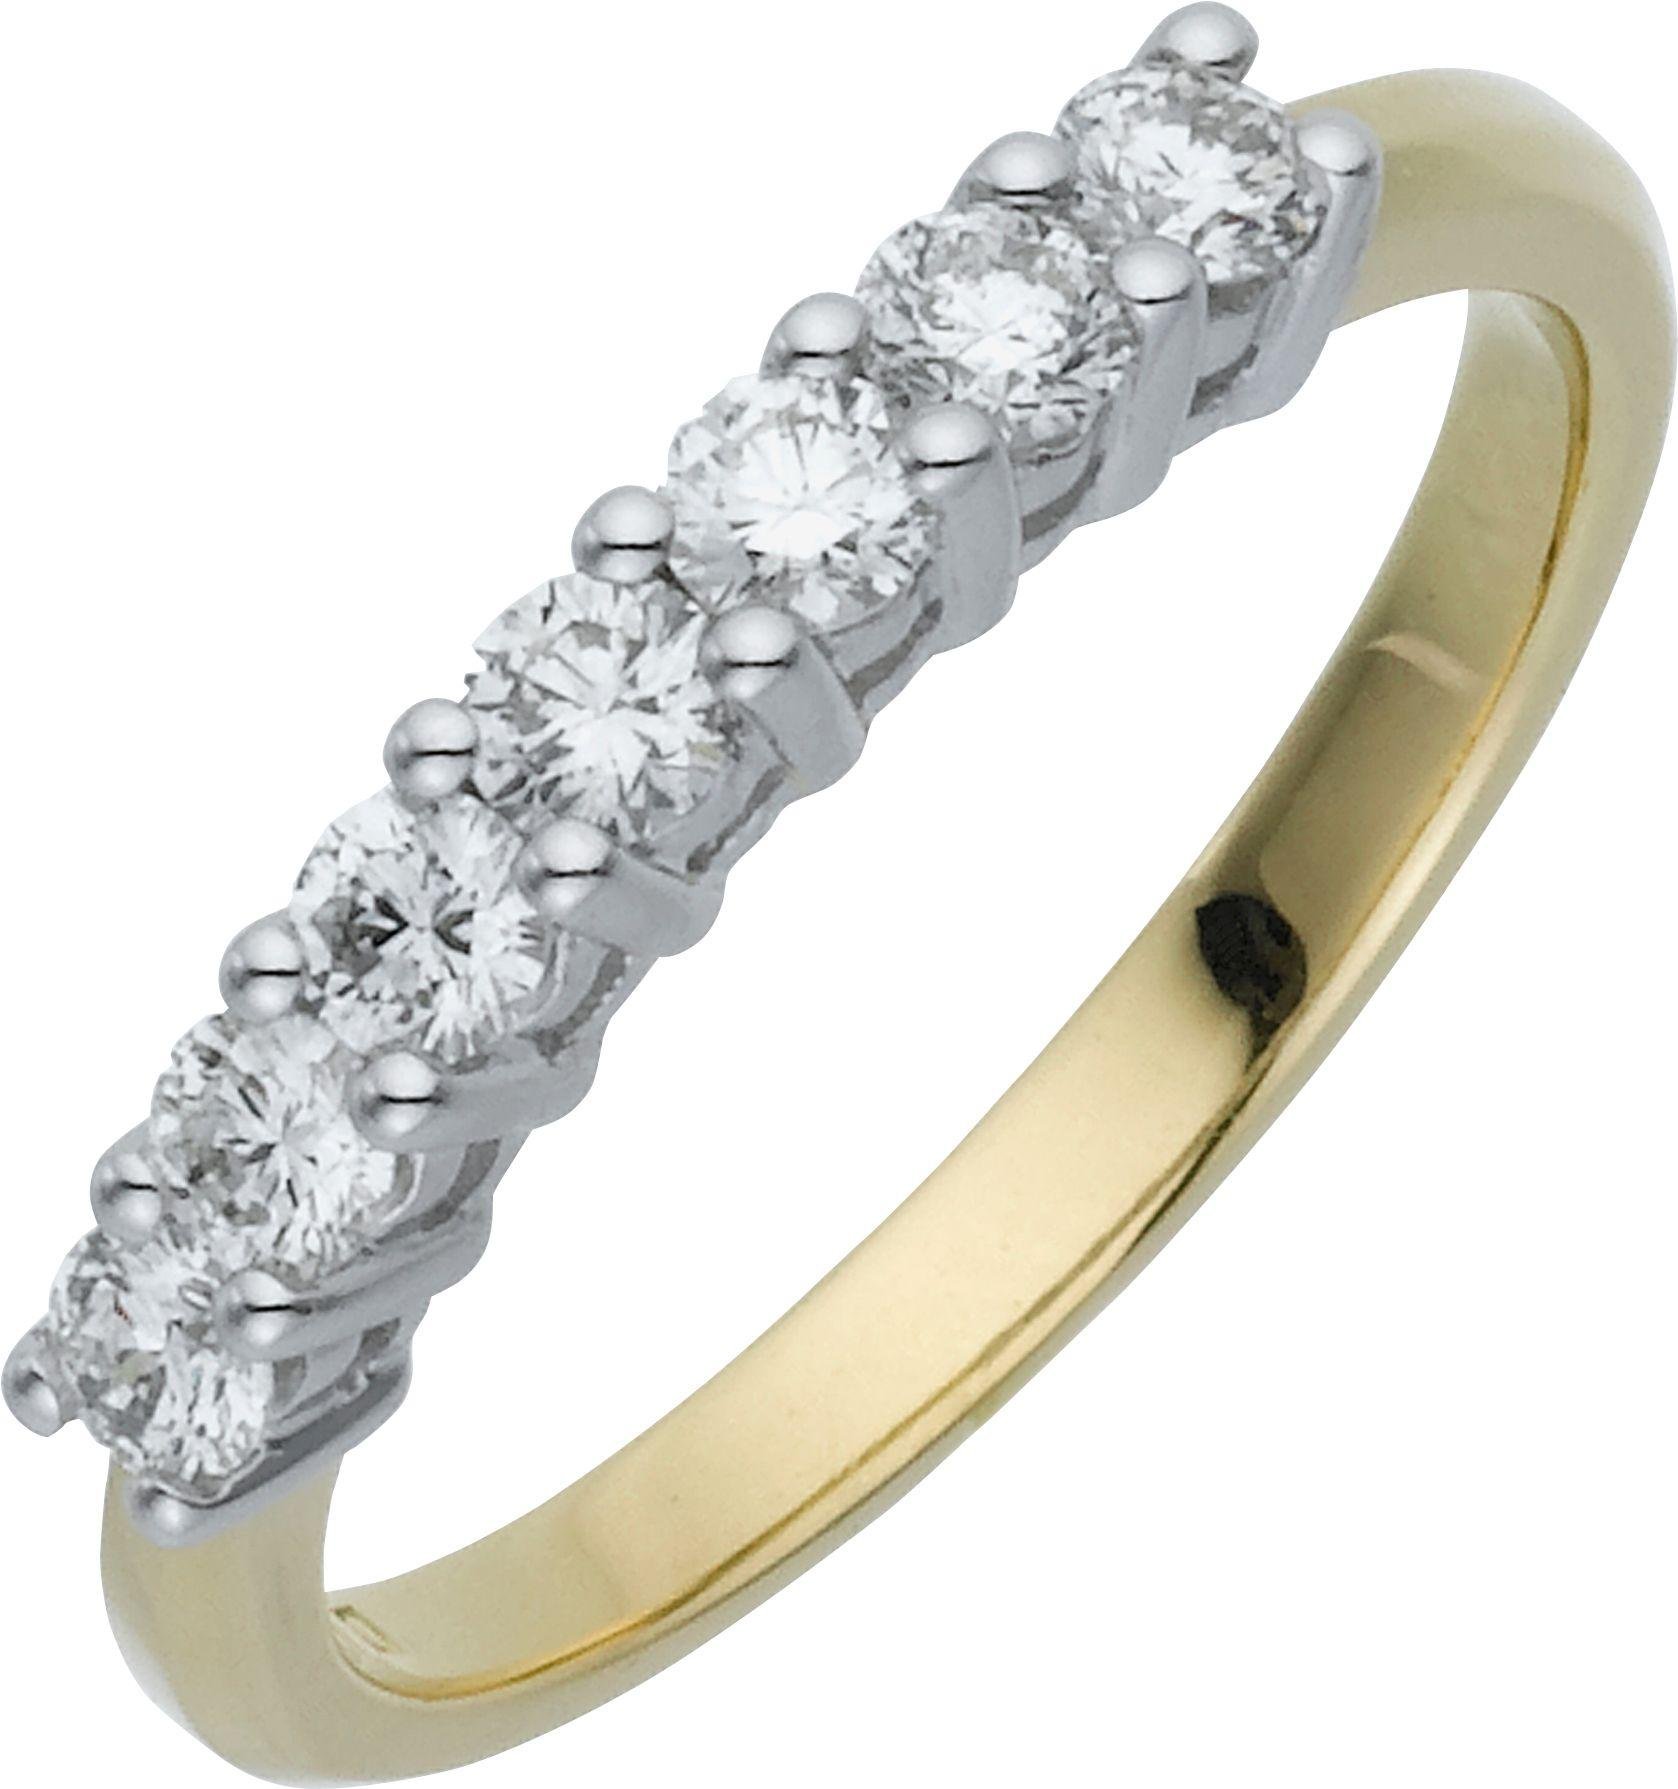 Everlasting Love 9ct Gold 7 Stone Eternity Ring - Size O